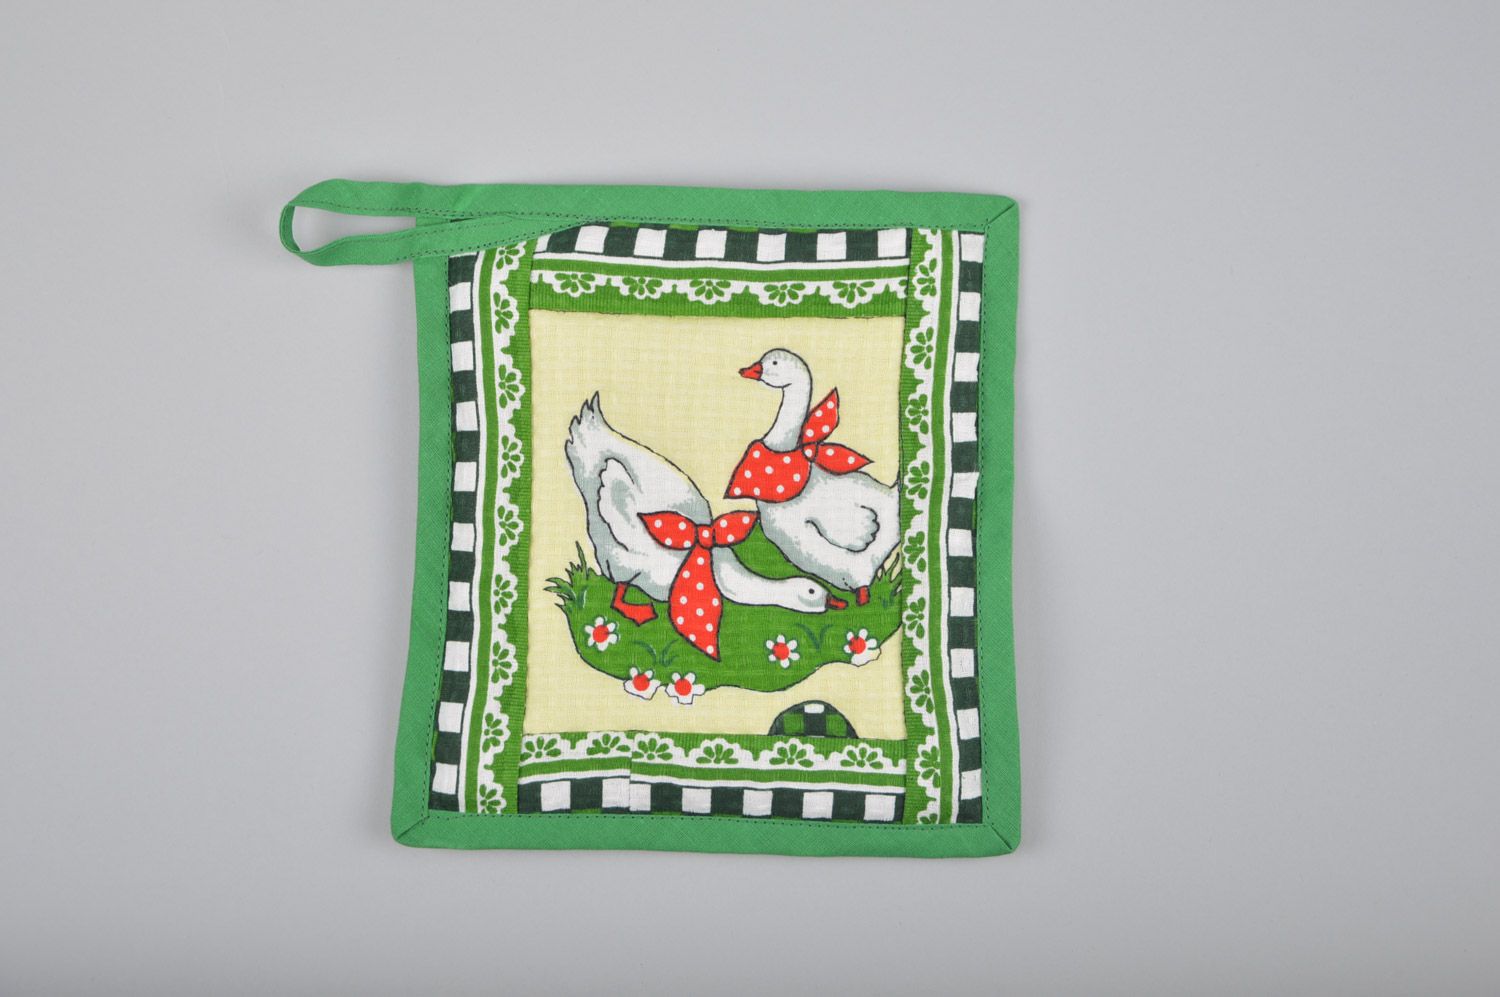 Handmade square pot holder sewn of cotton with geese image in green color palette photo 1